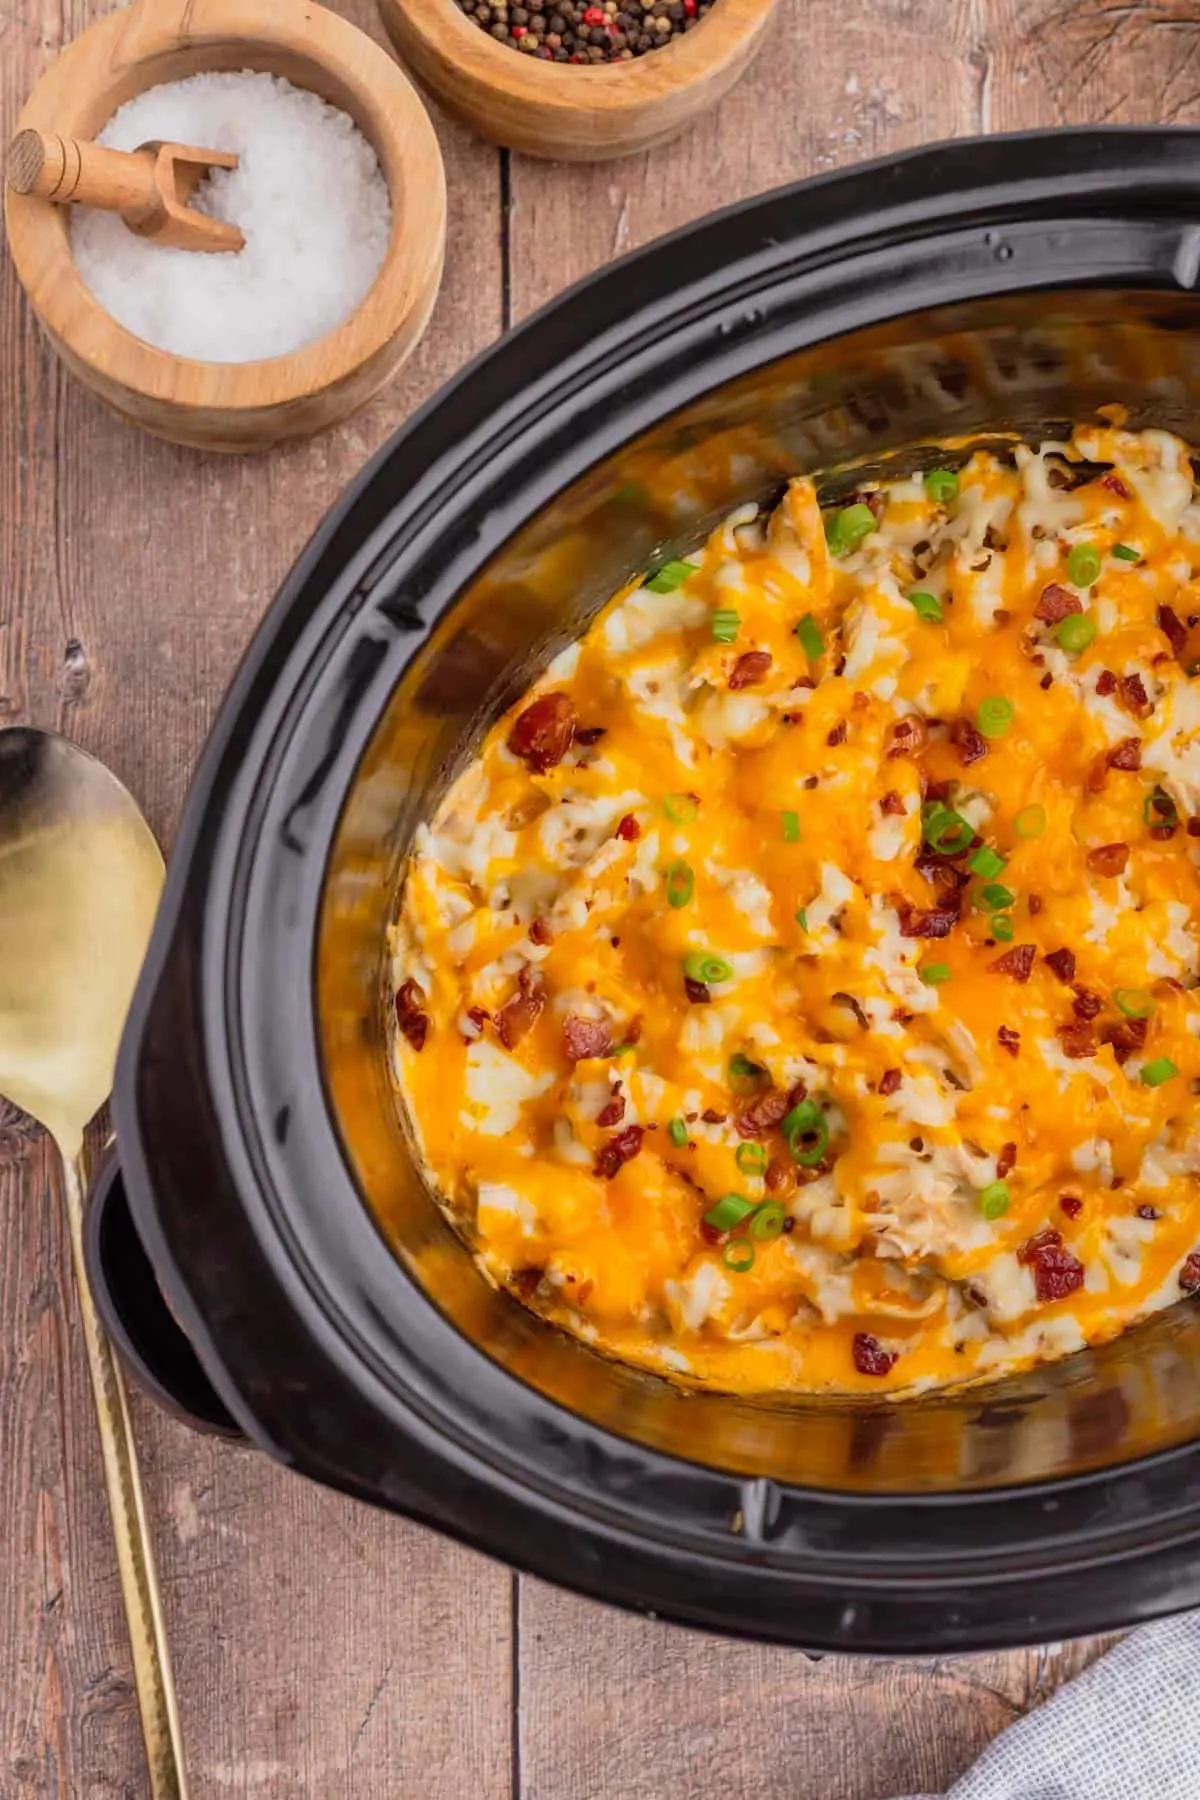 Crock Pot Crack Chicken is a creamy slow cooker chicken dish loaded with ranch dressing, shredded chicken, cream cheese, bacon, shredded cheese and chopped green onions.